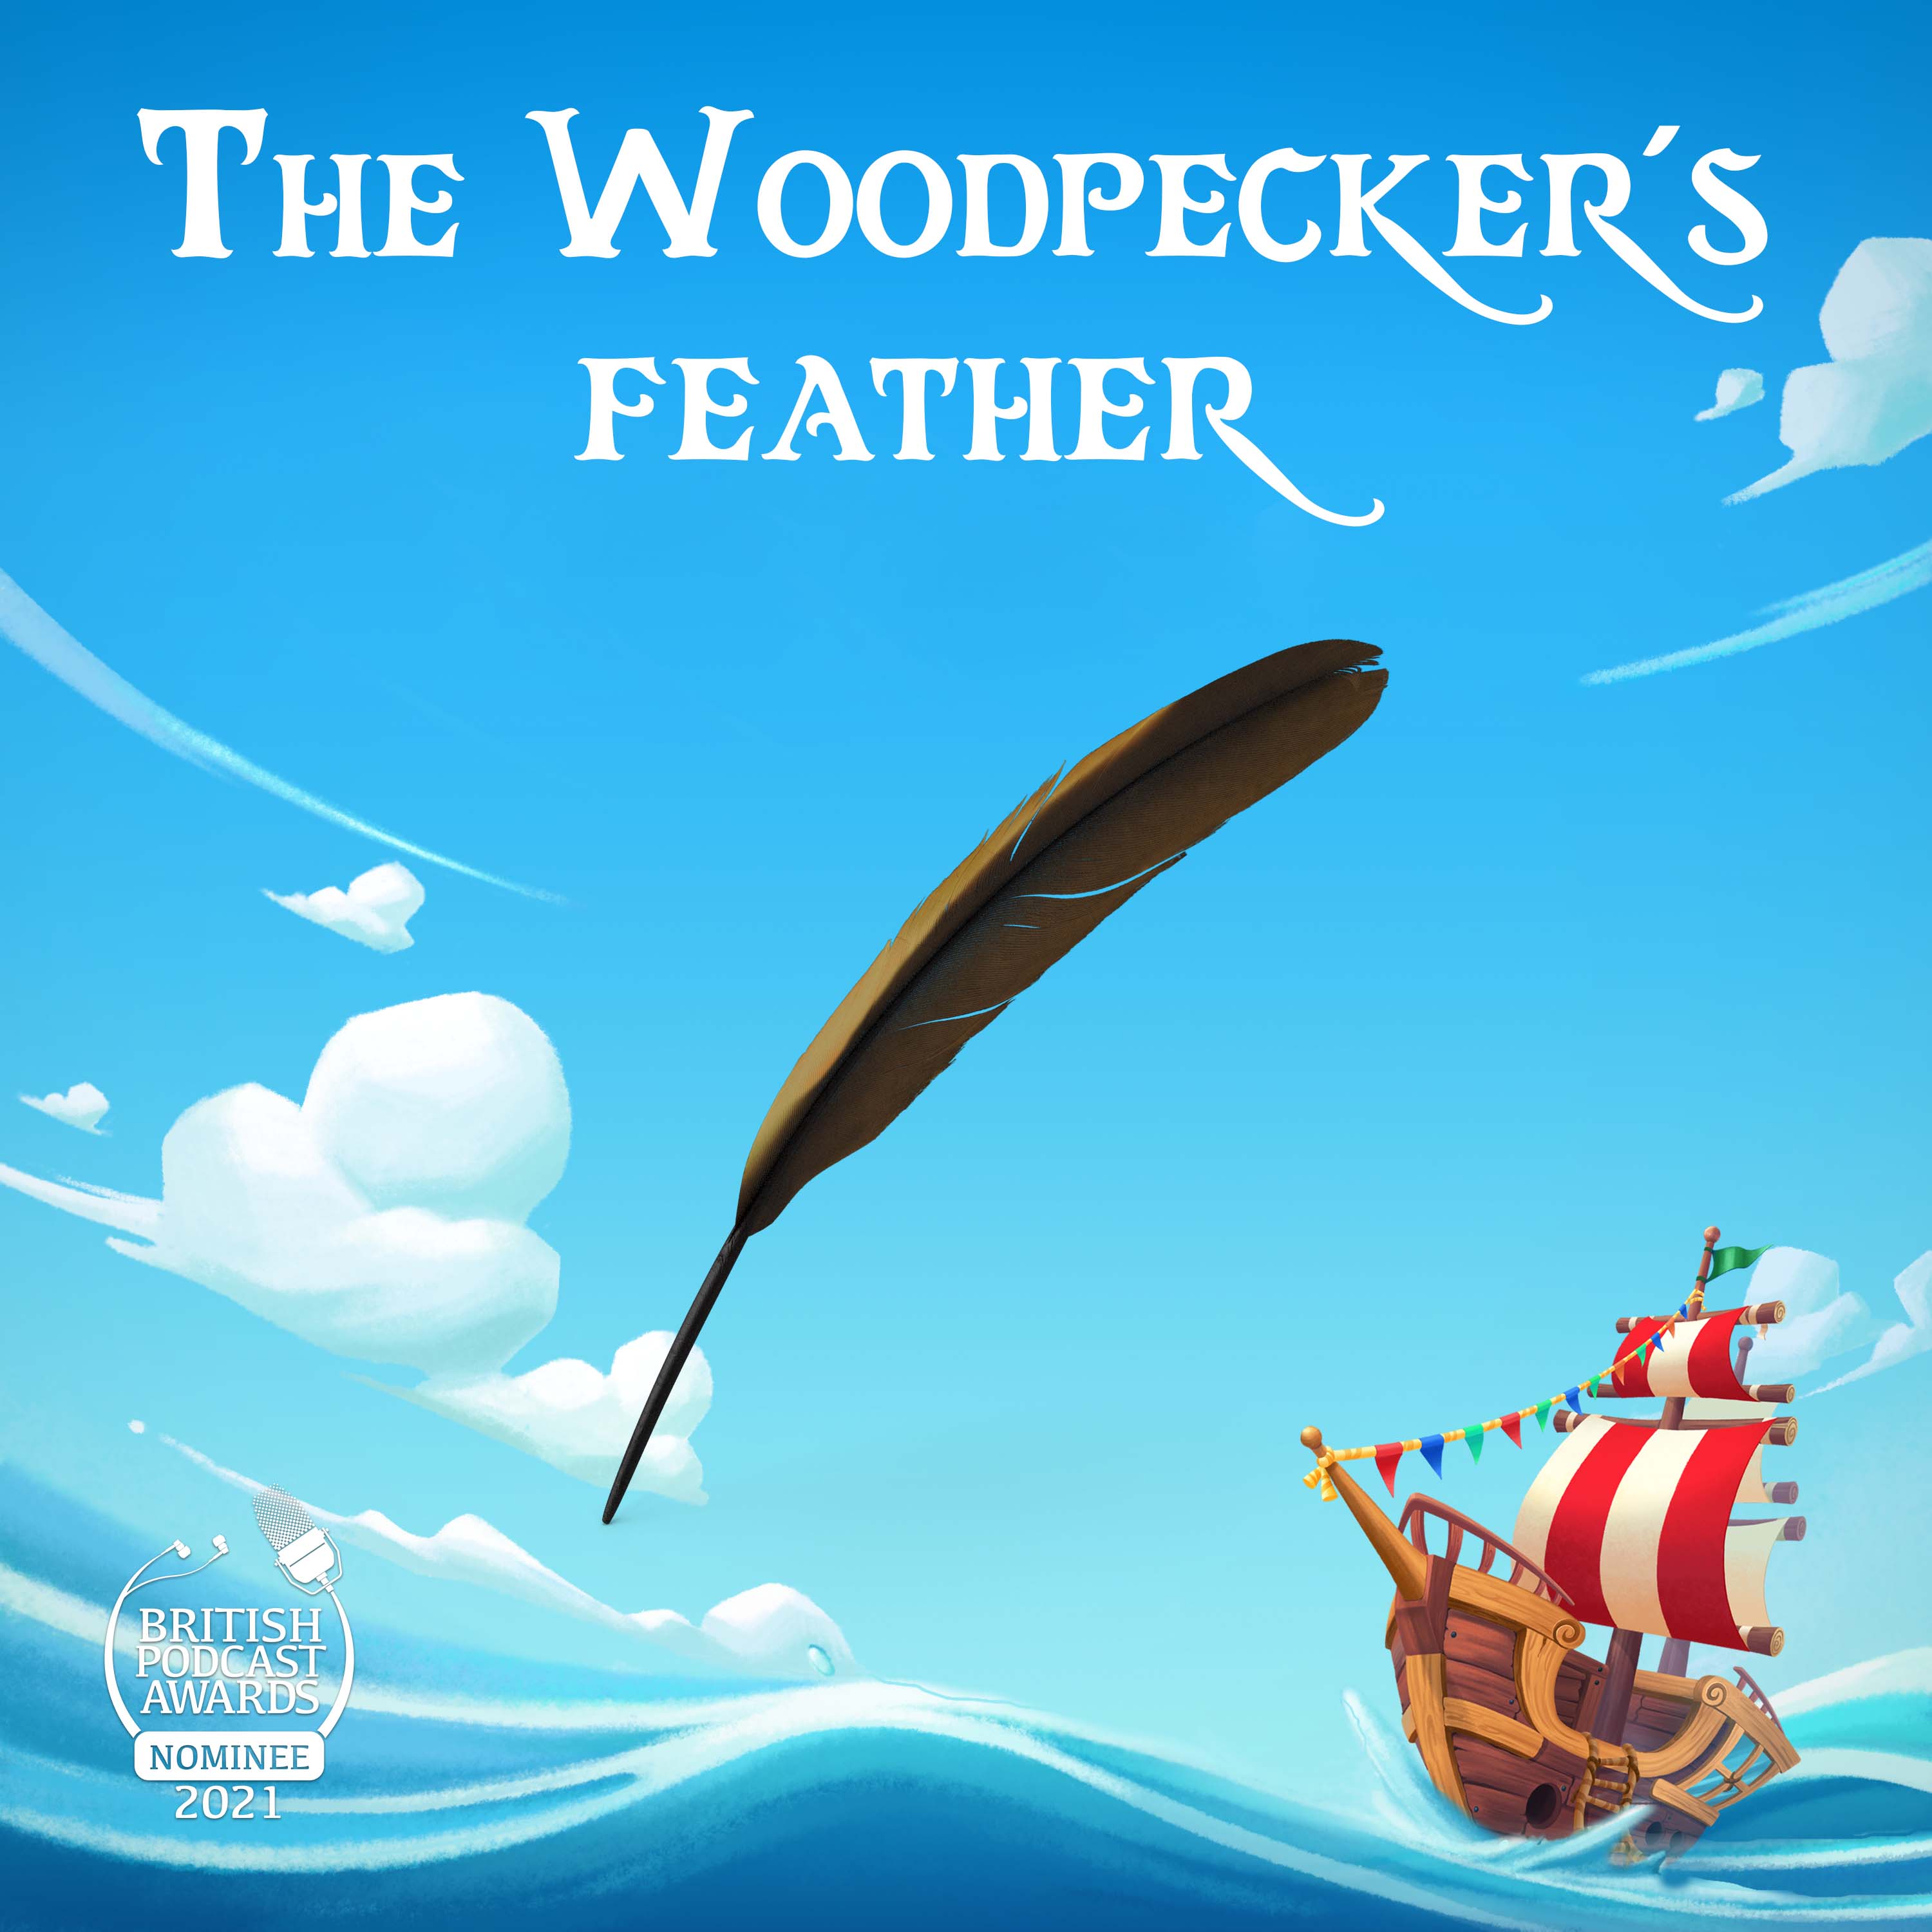 The Woodpecker’s Feather